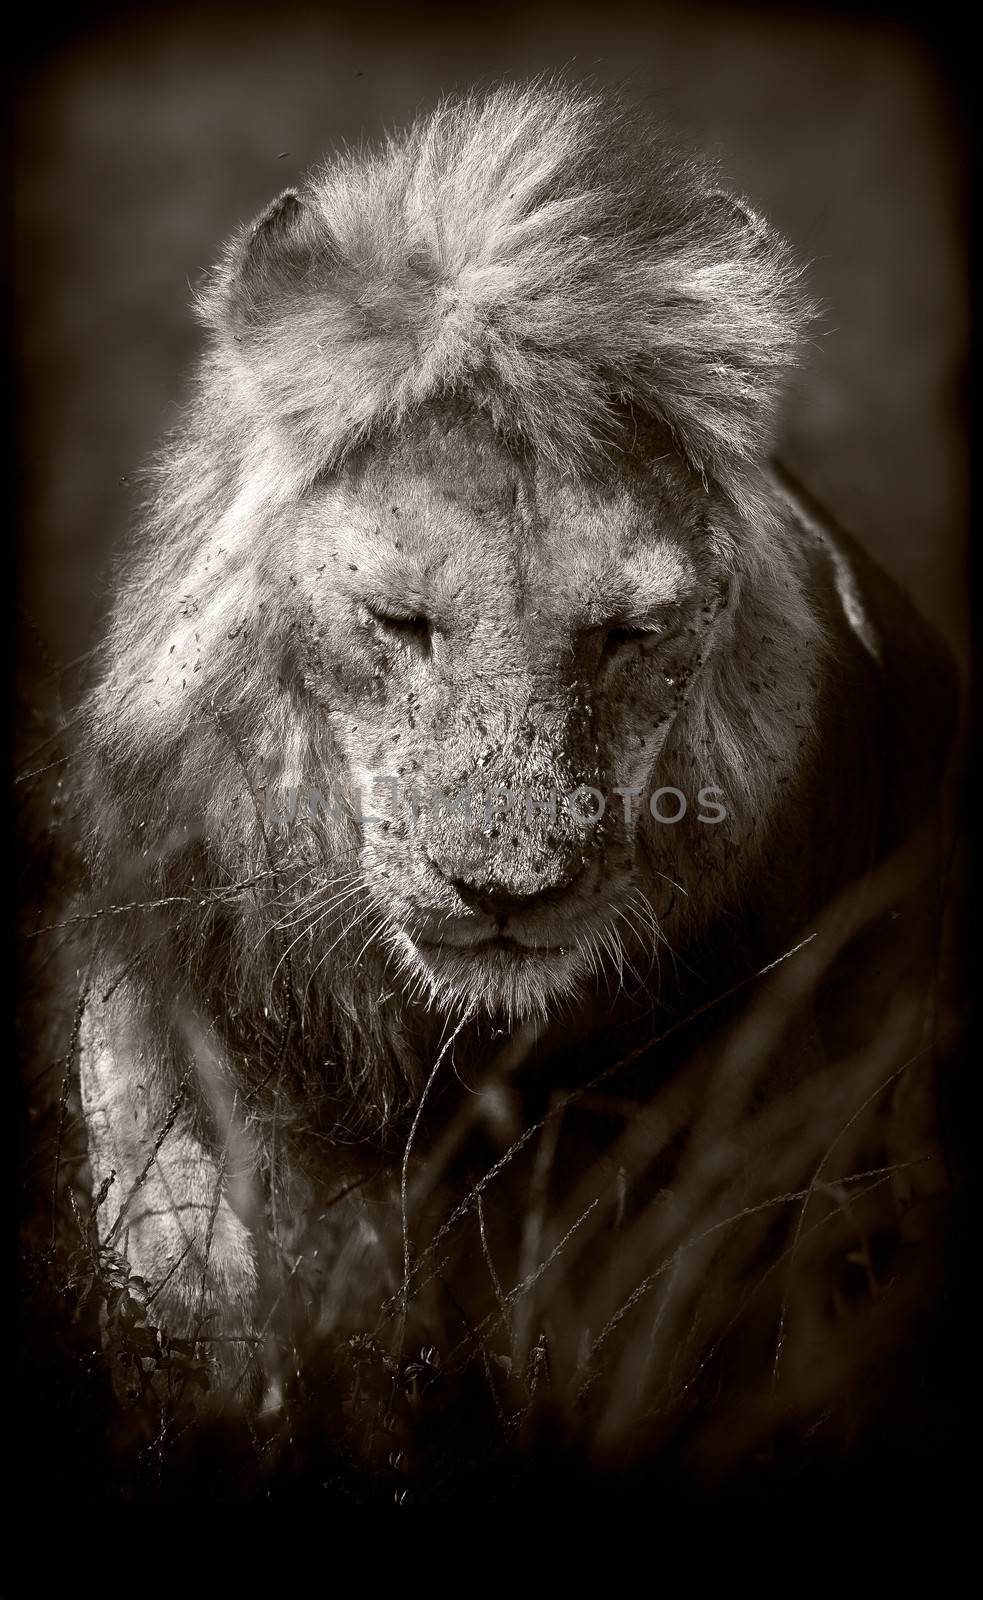 Sepia monochrome image of a wild African Lion